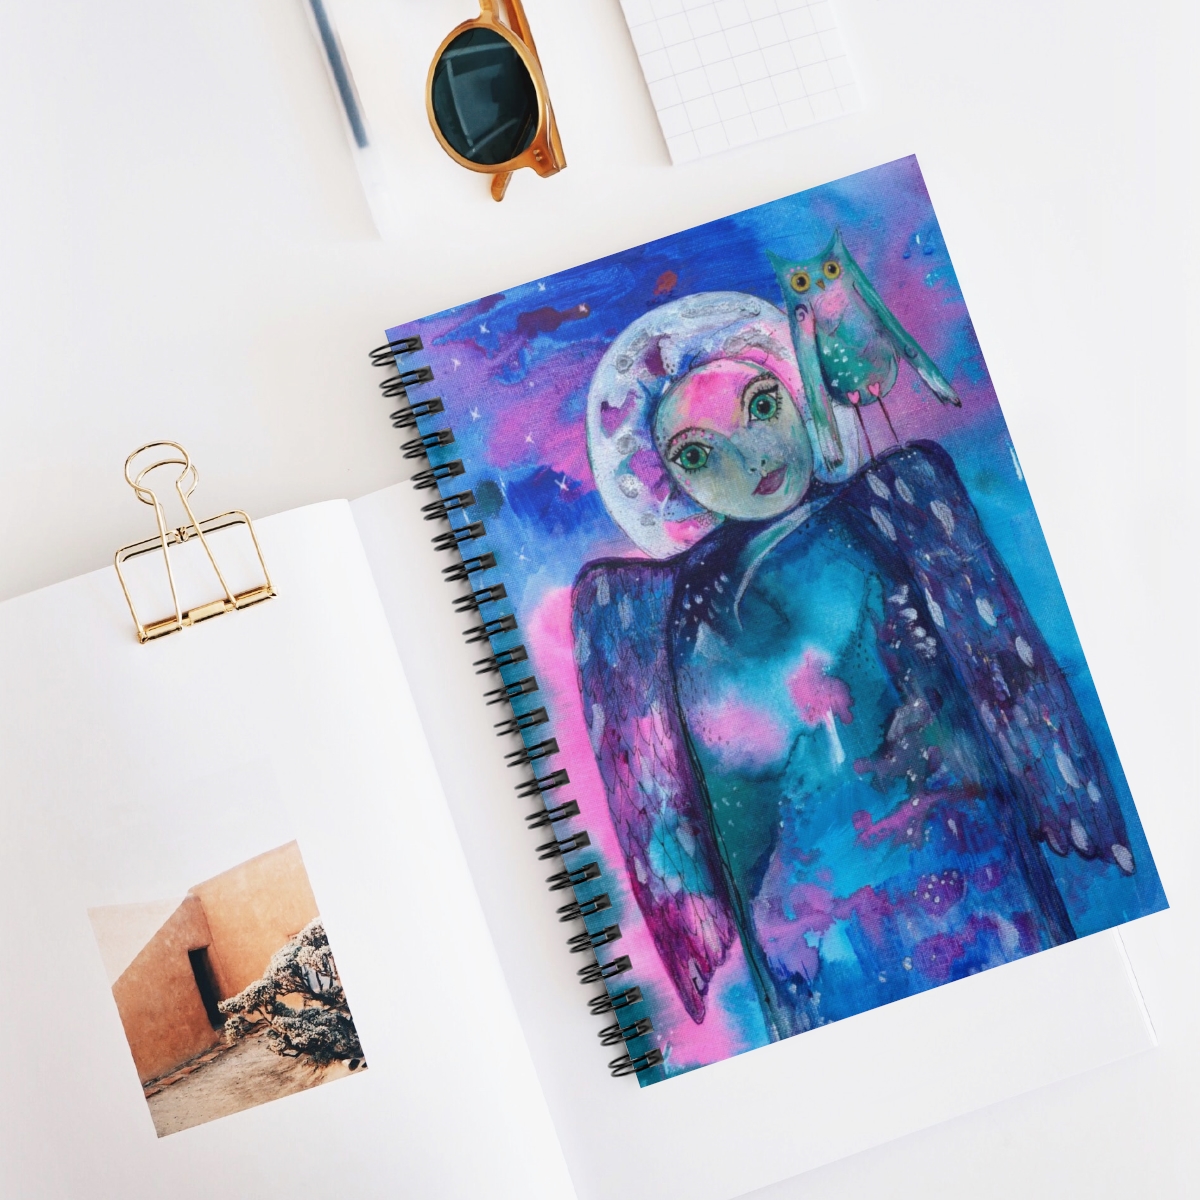 Angel journal in context. It takes the image - guardian angel of Intuition - she is created from abstract blues and pinks. Her moon like face is surrounded by a silver halo and she has an owl on her shoulder.